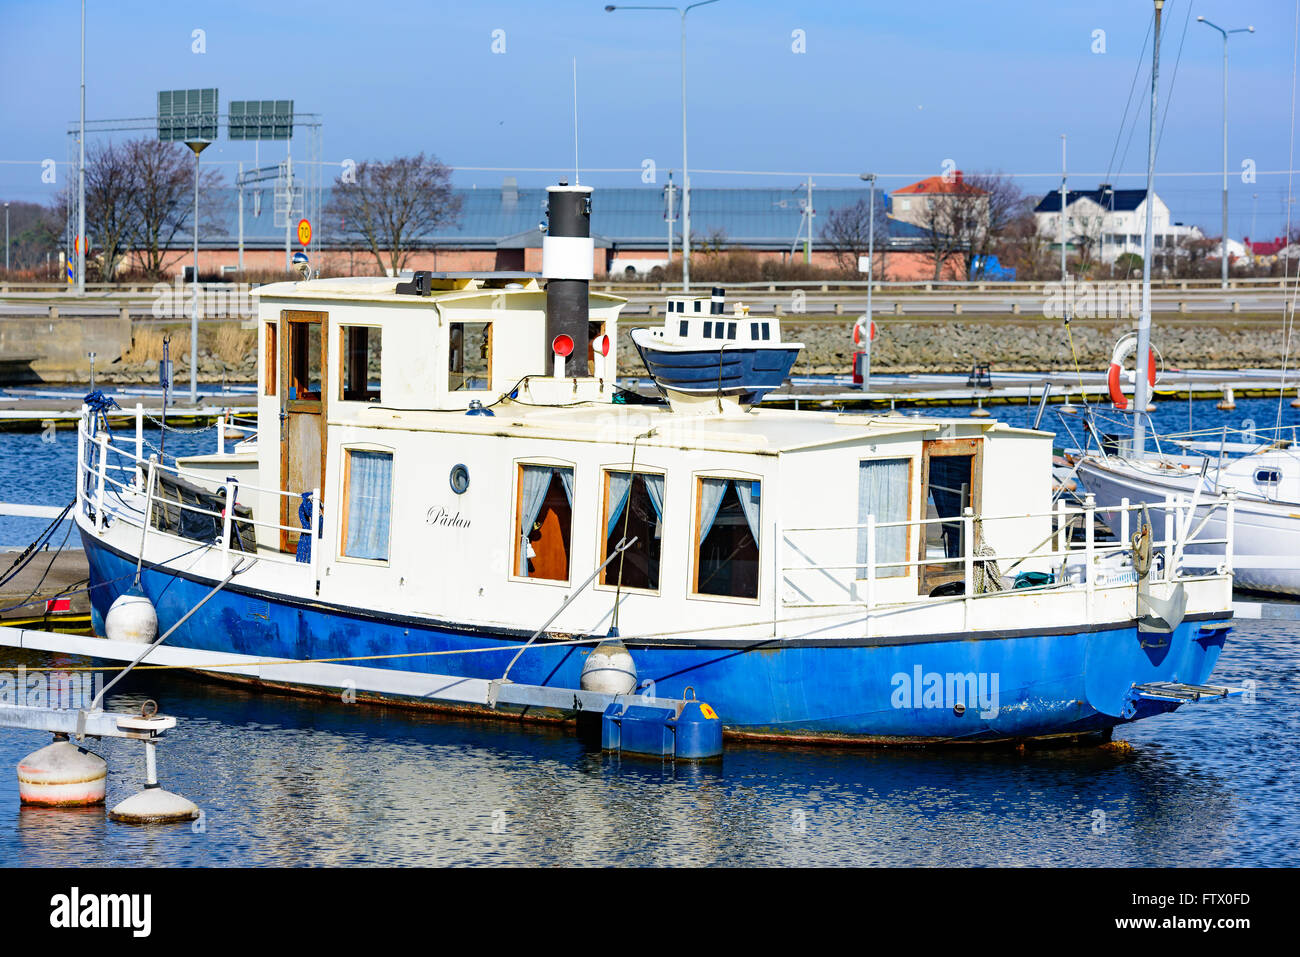 Karlskrona, Sweden - March 27, 2016: Small miniature copy of a boat placed on top of the original boat in the town marina. Stock Photo